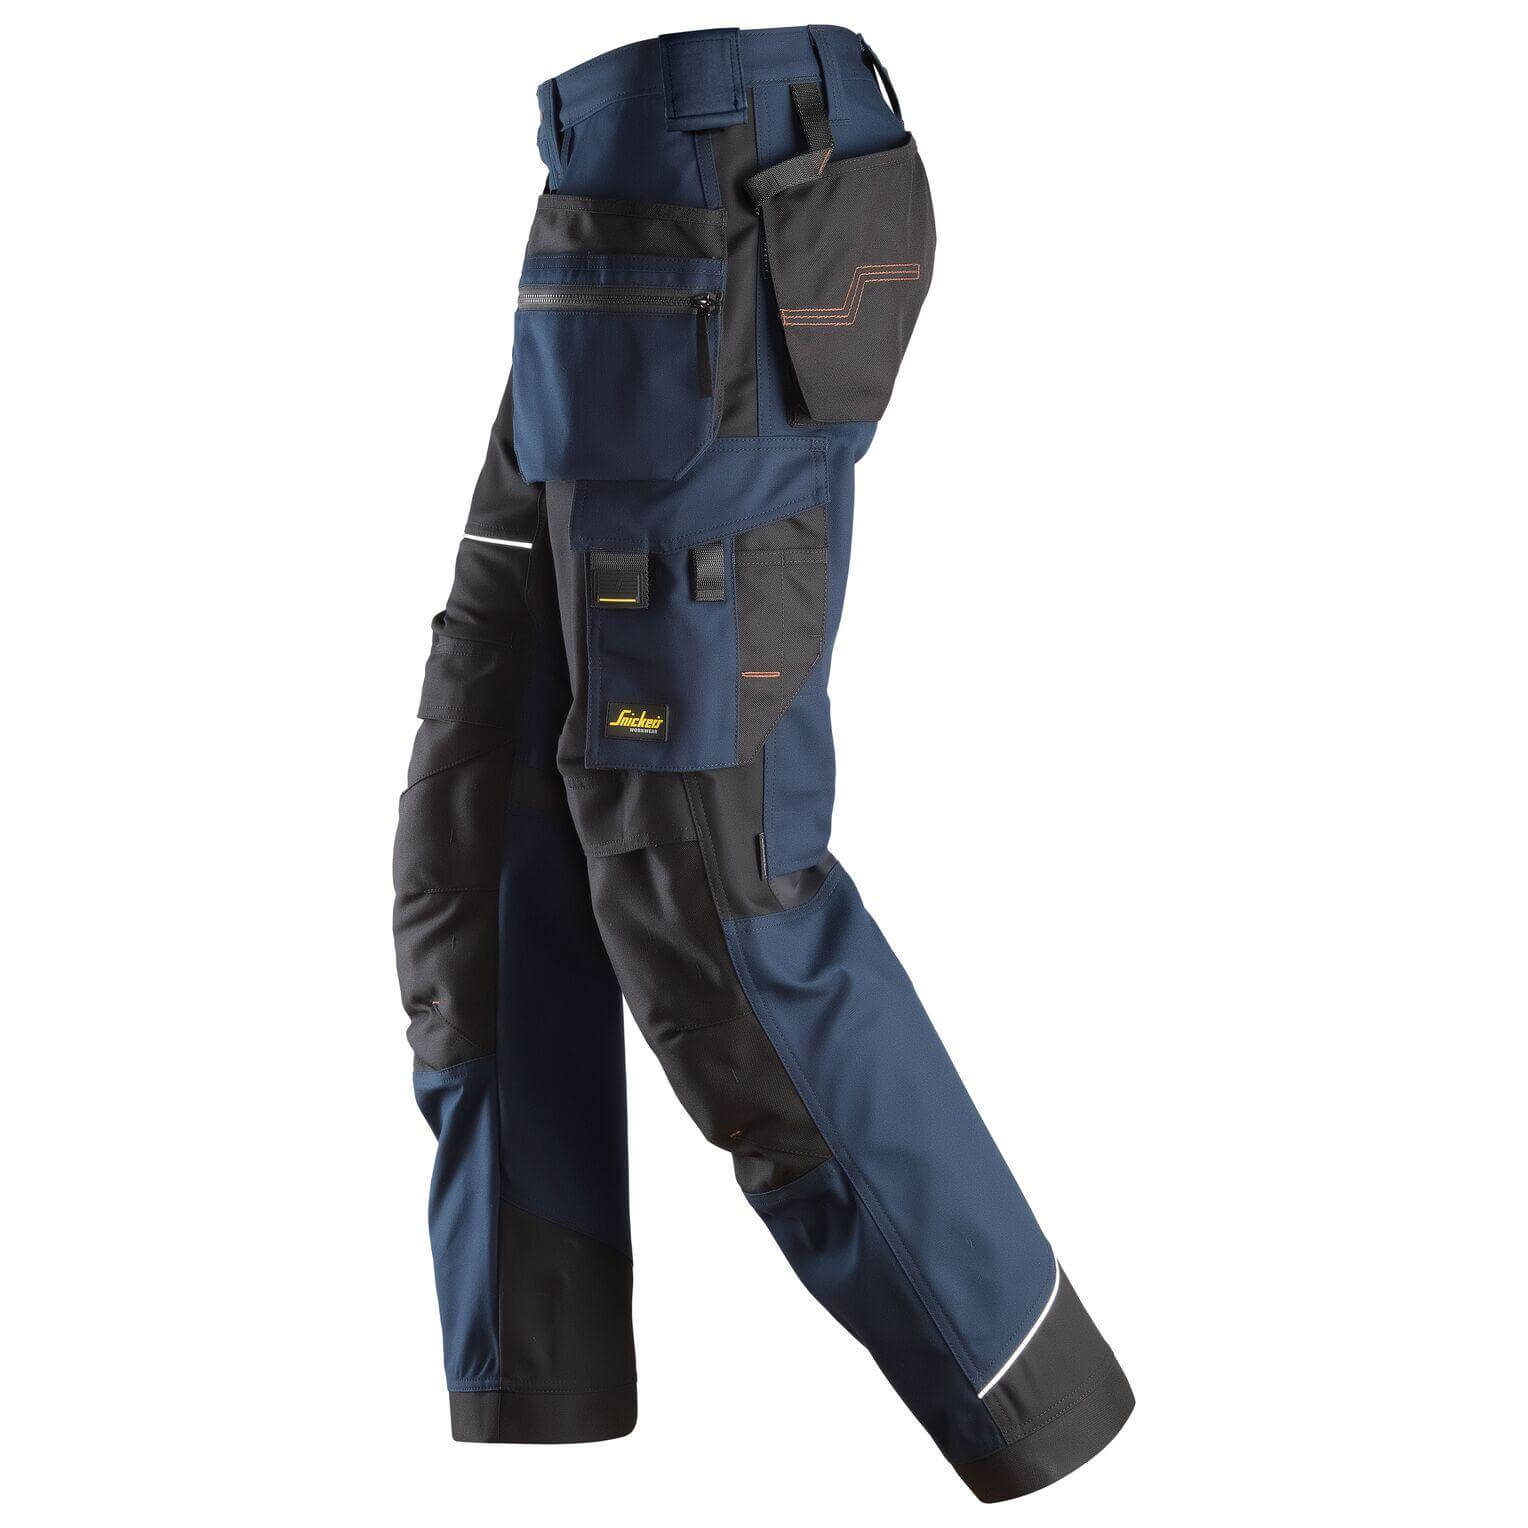 Snickers 6214 RuffWork Canvas 2B Hard Wearing Work Trousers with Holster Pockets Navy Black left